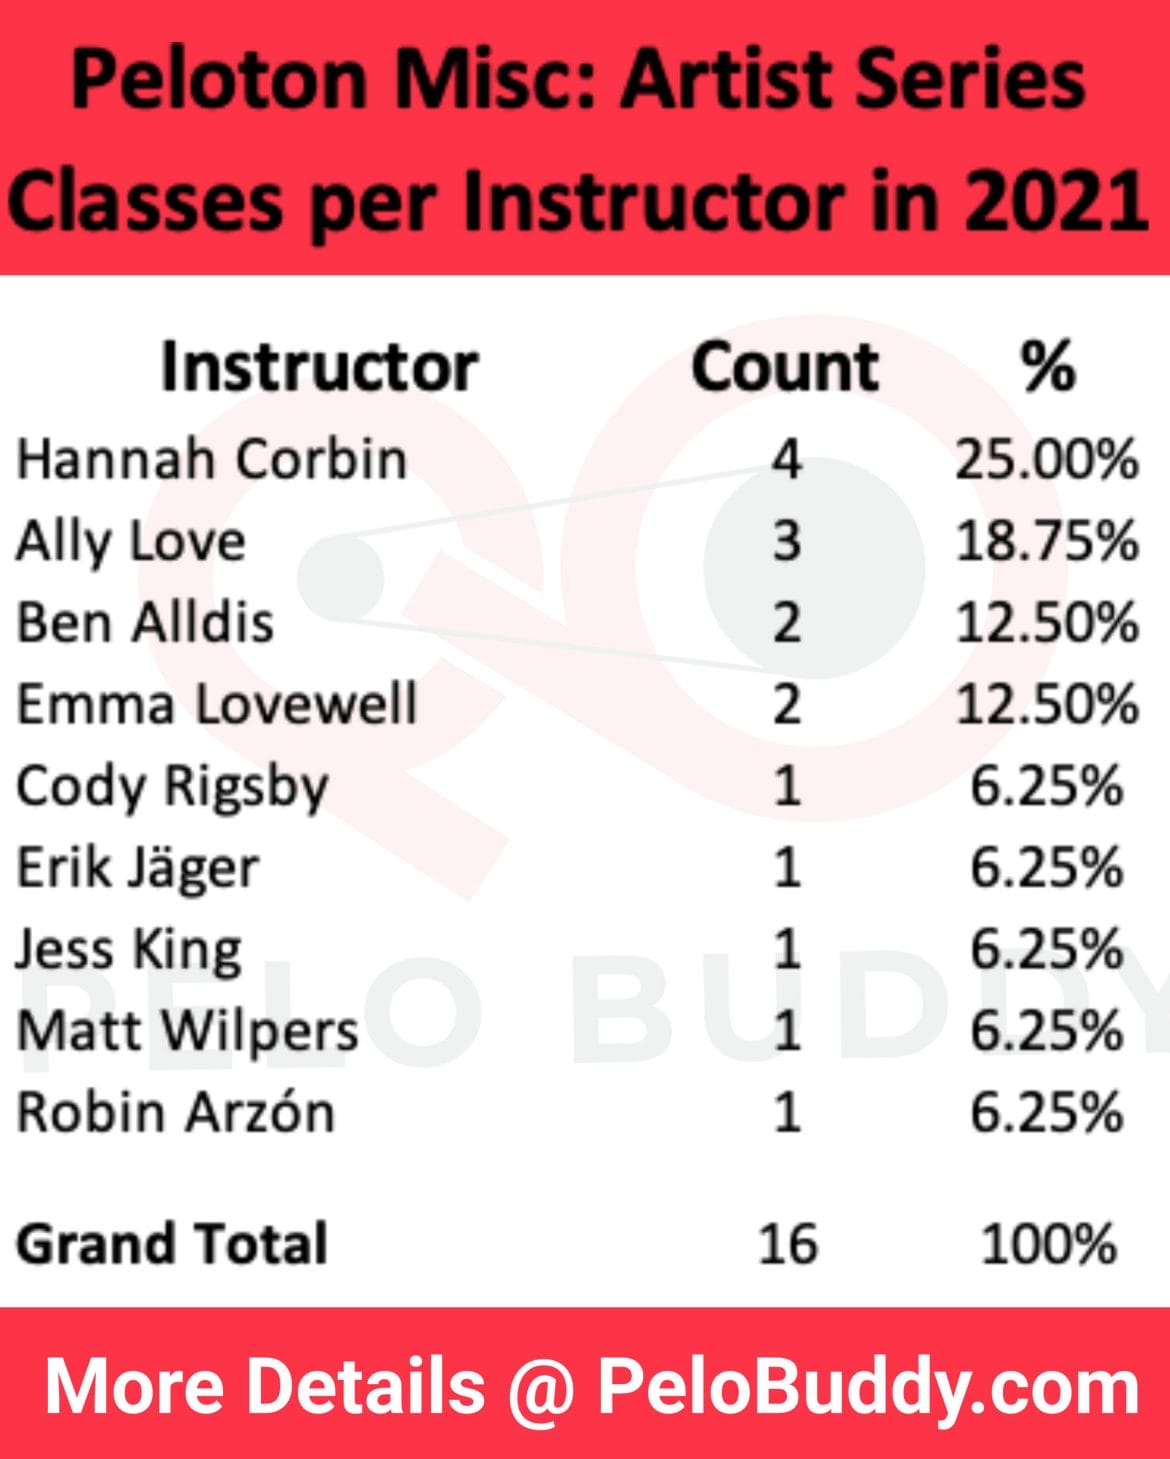 The most popular Peloton instructors in various other classes, according to the number of artist series classes they taught, in 2021.